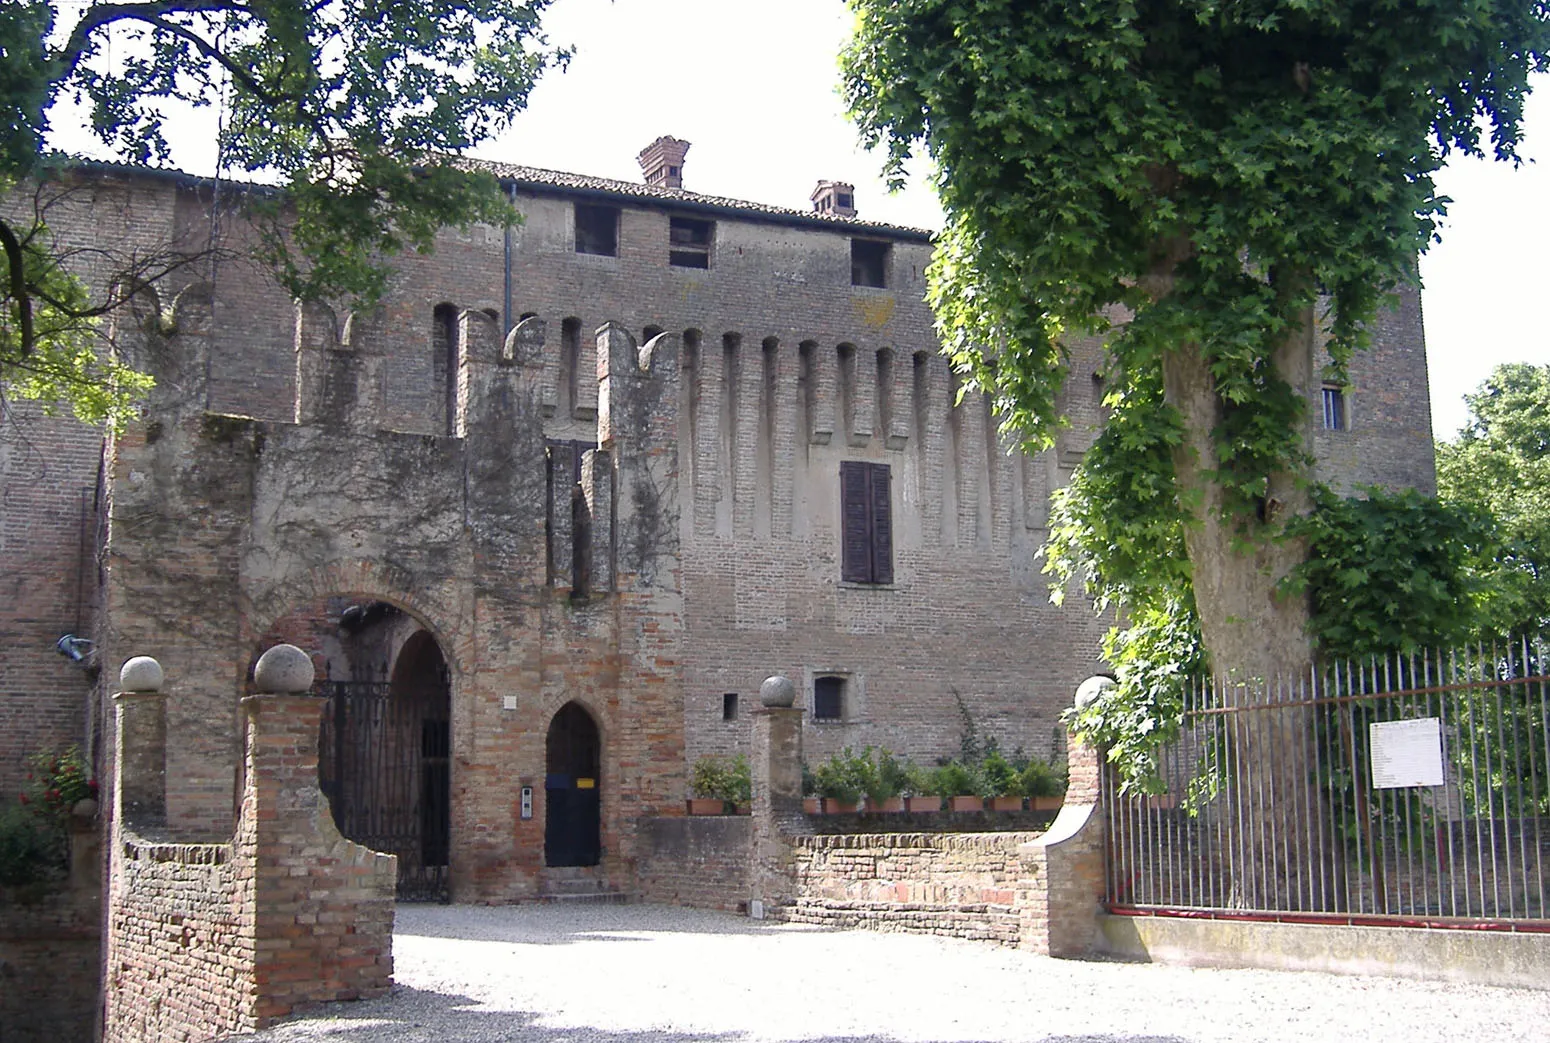 Photo showing: The castle of Maccastorna, Italy